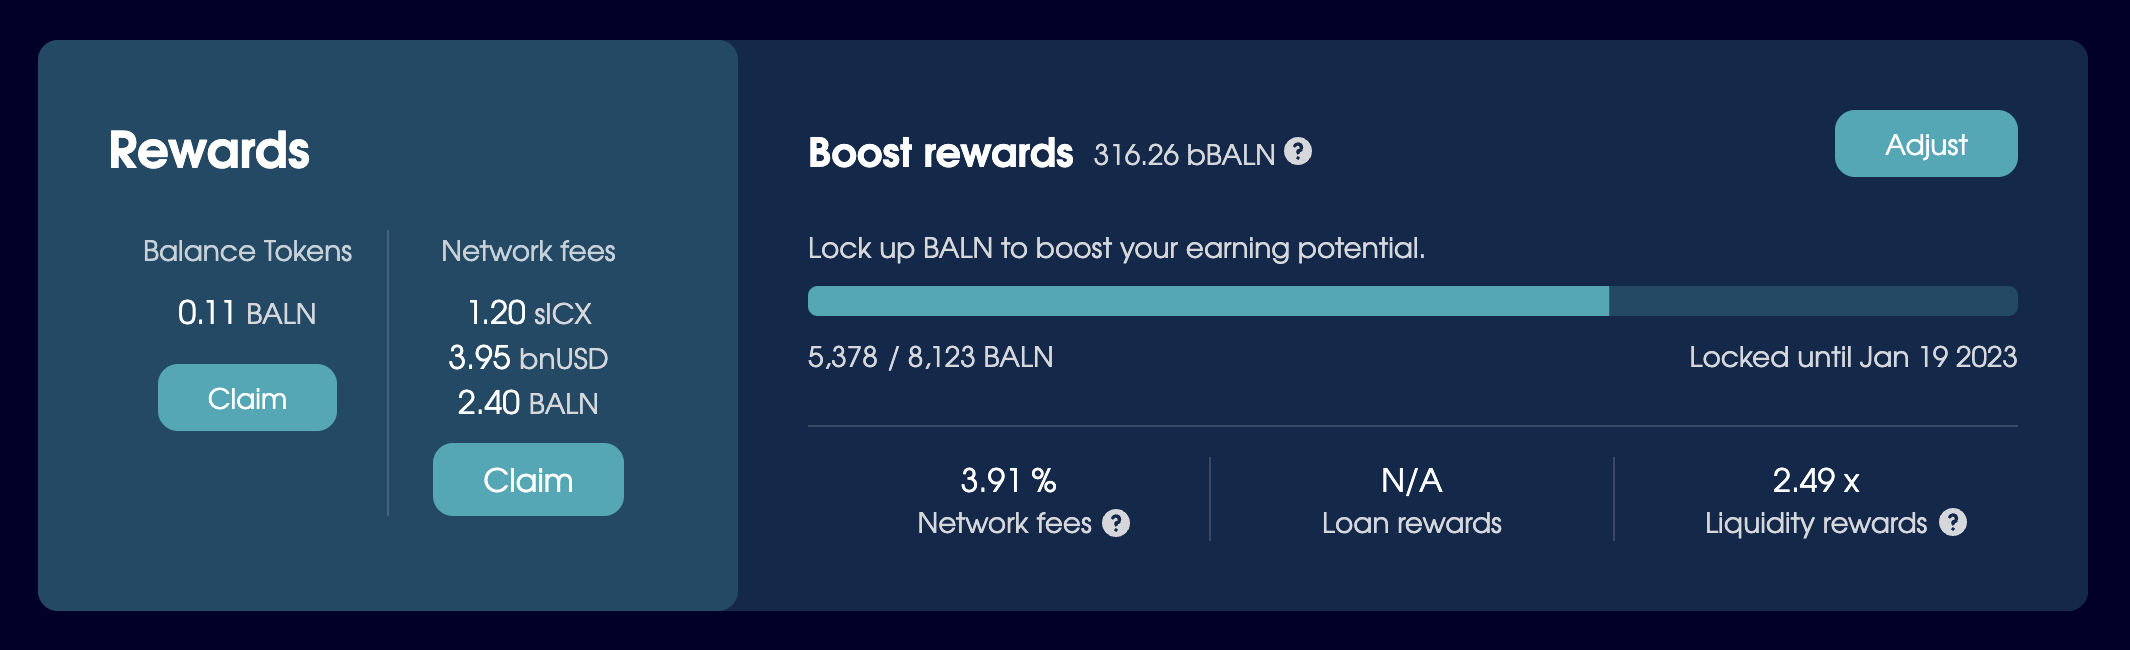 Prepare for the Boosted BALN upgrade